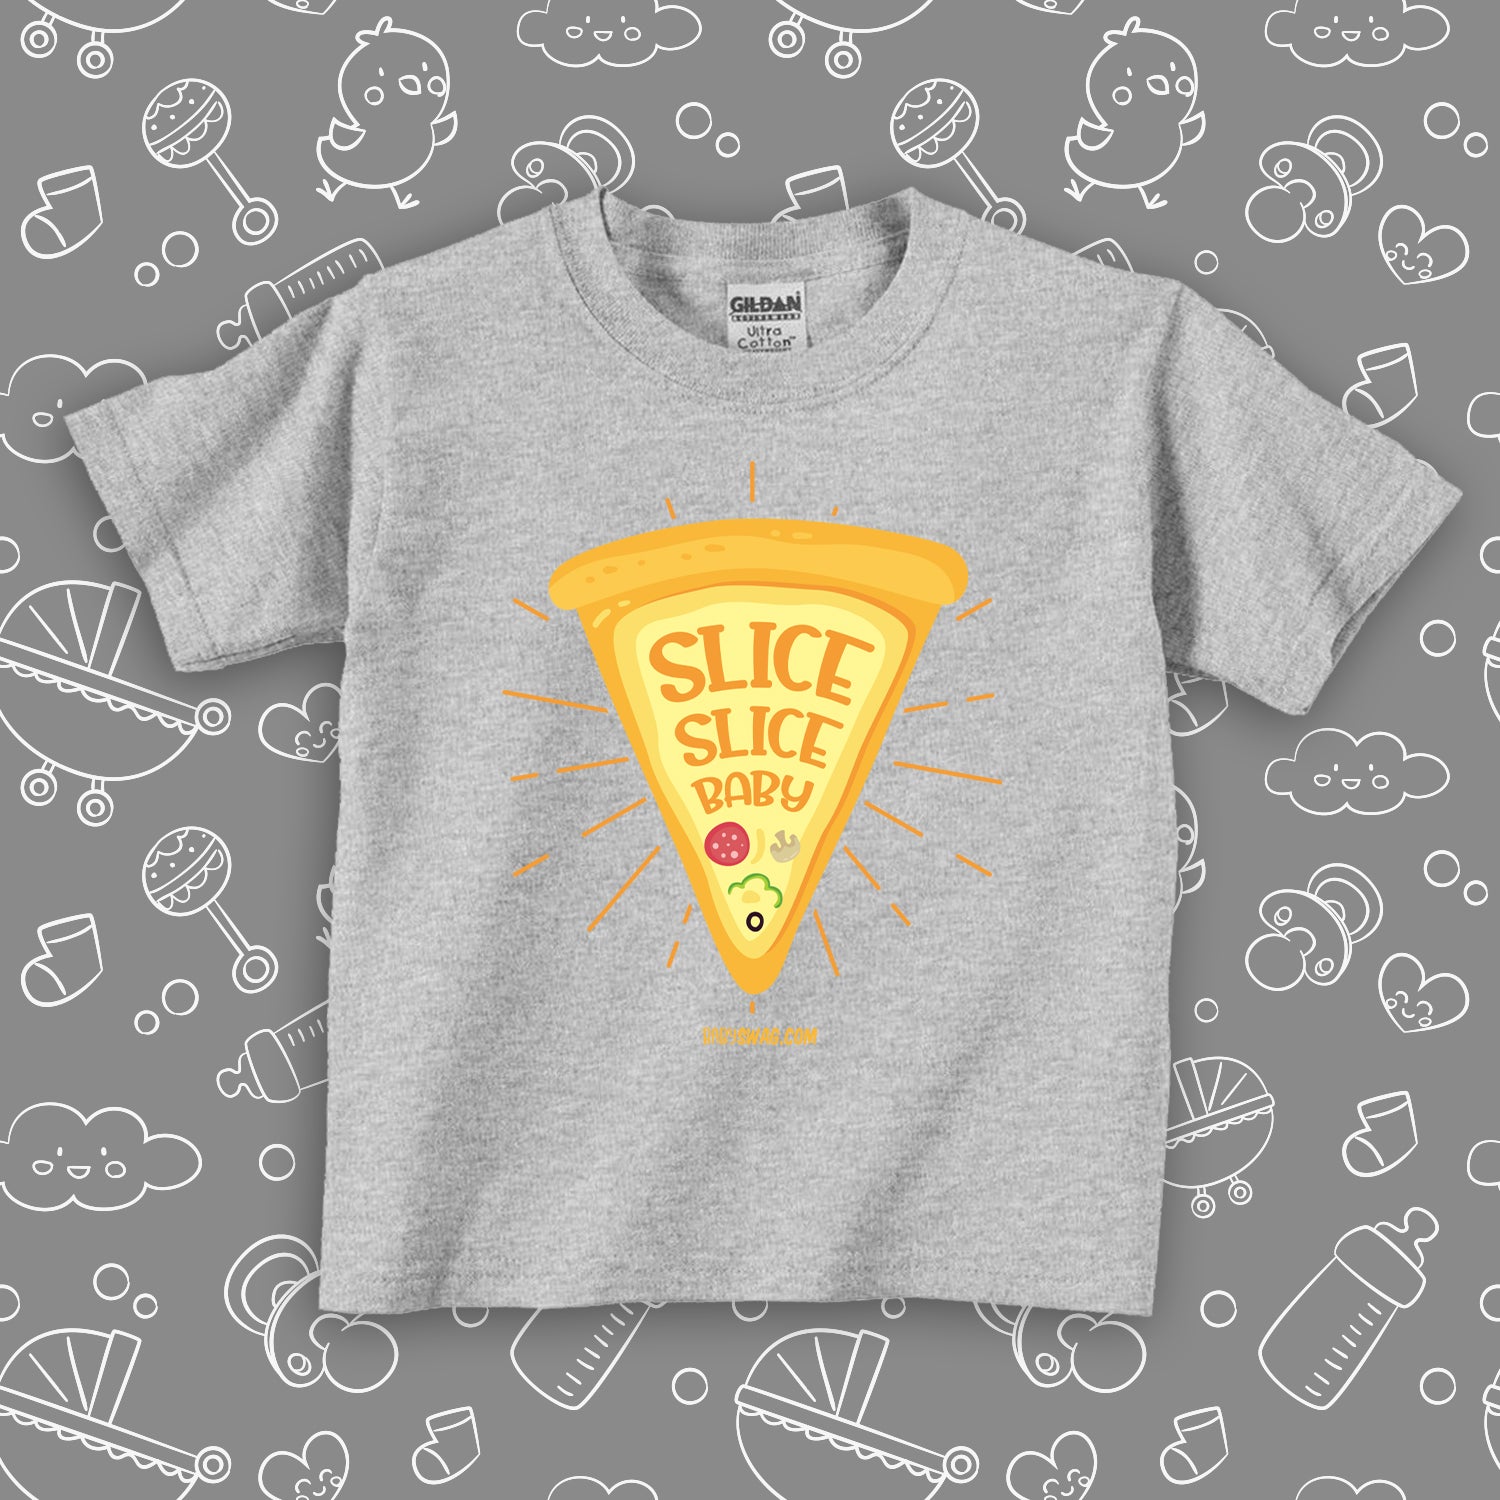 Cute toddler shirt with saying "Slice Slice Baby" in grey. 